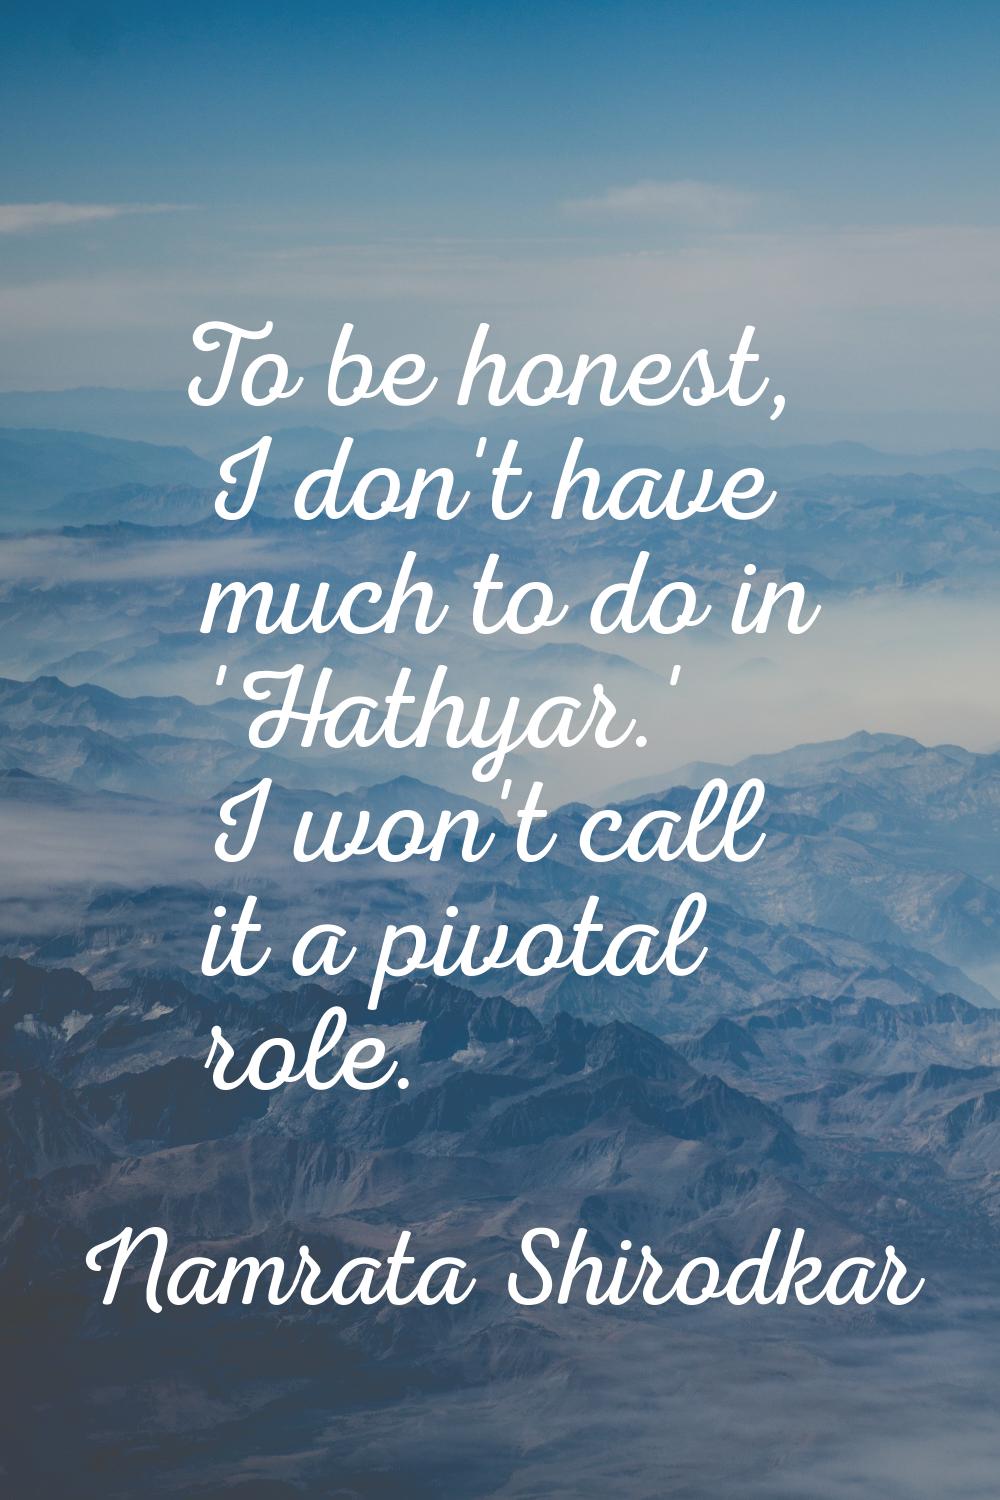 To be honest, I don't have much to do in 'Hathyar.' I won't call it a pivotal role.